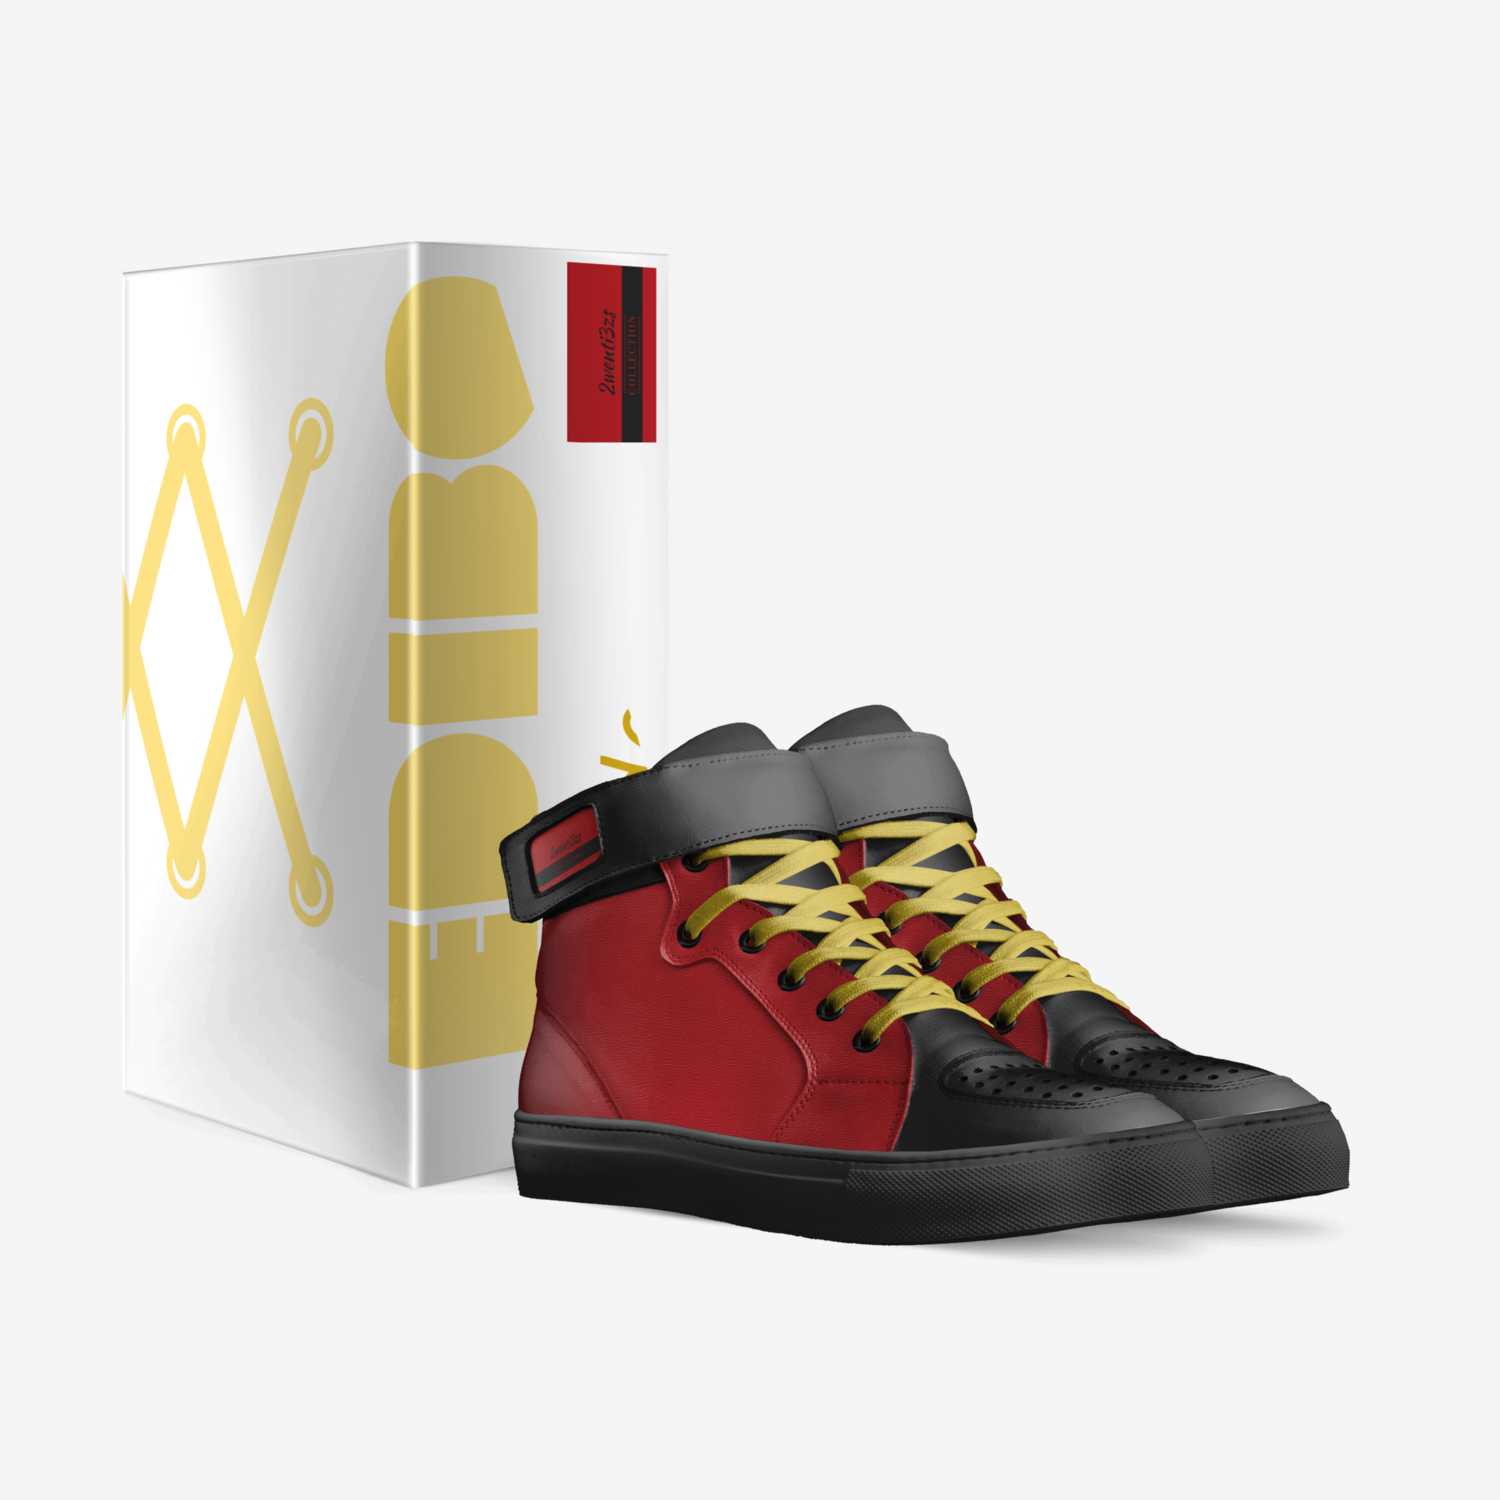 2wenti3zs custom made in Italy shoes by Kanah Israel | Box view